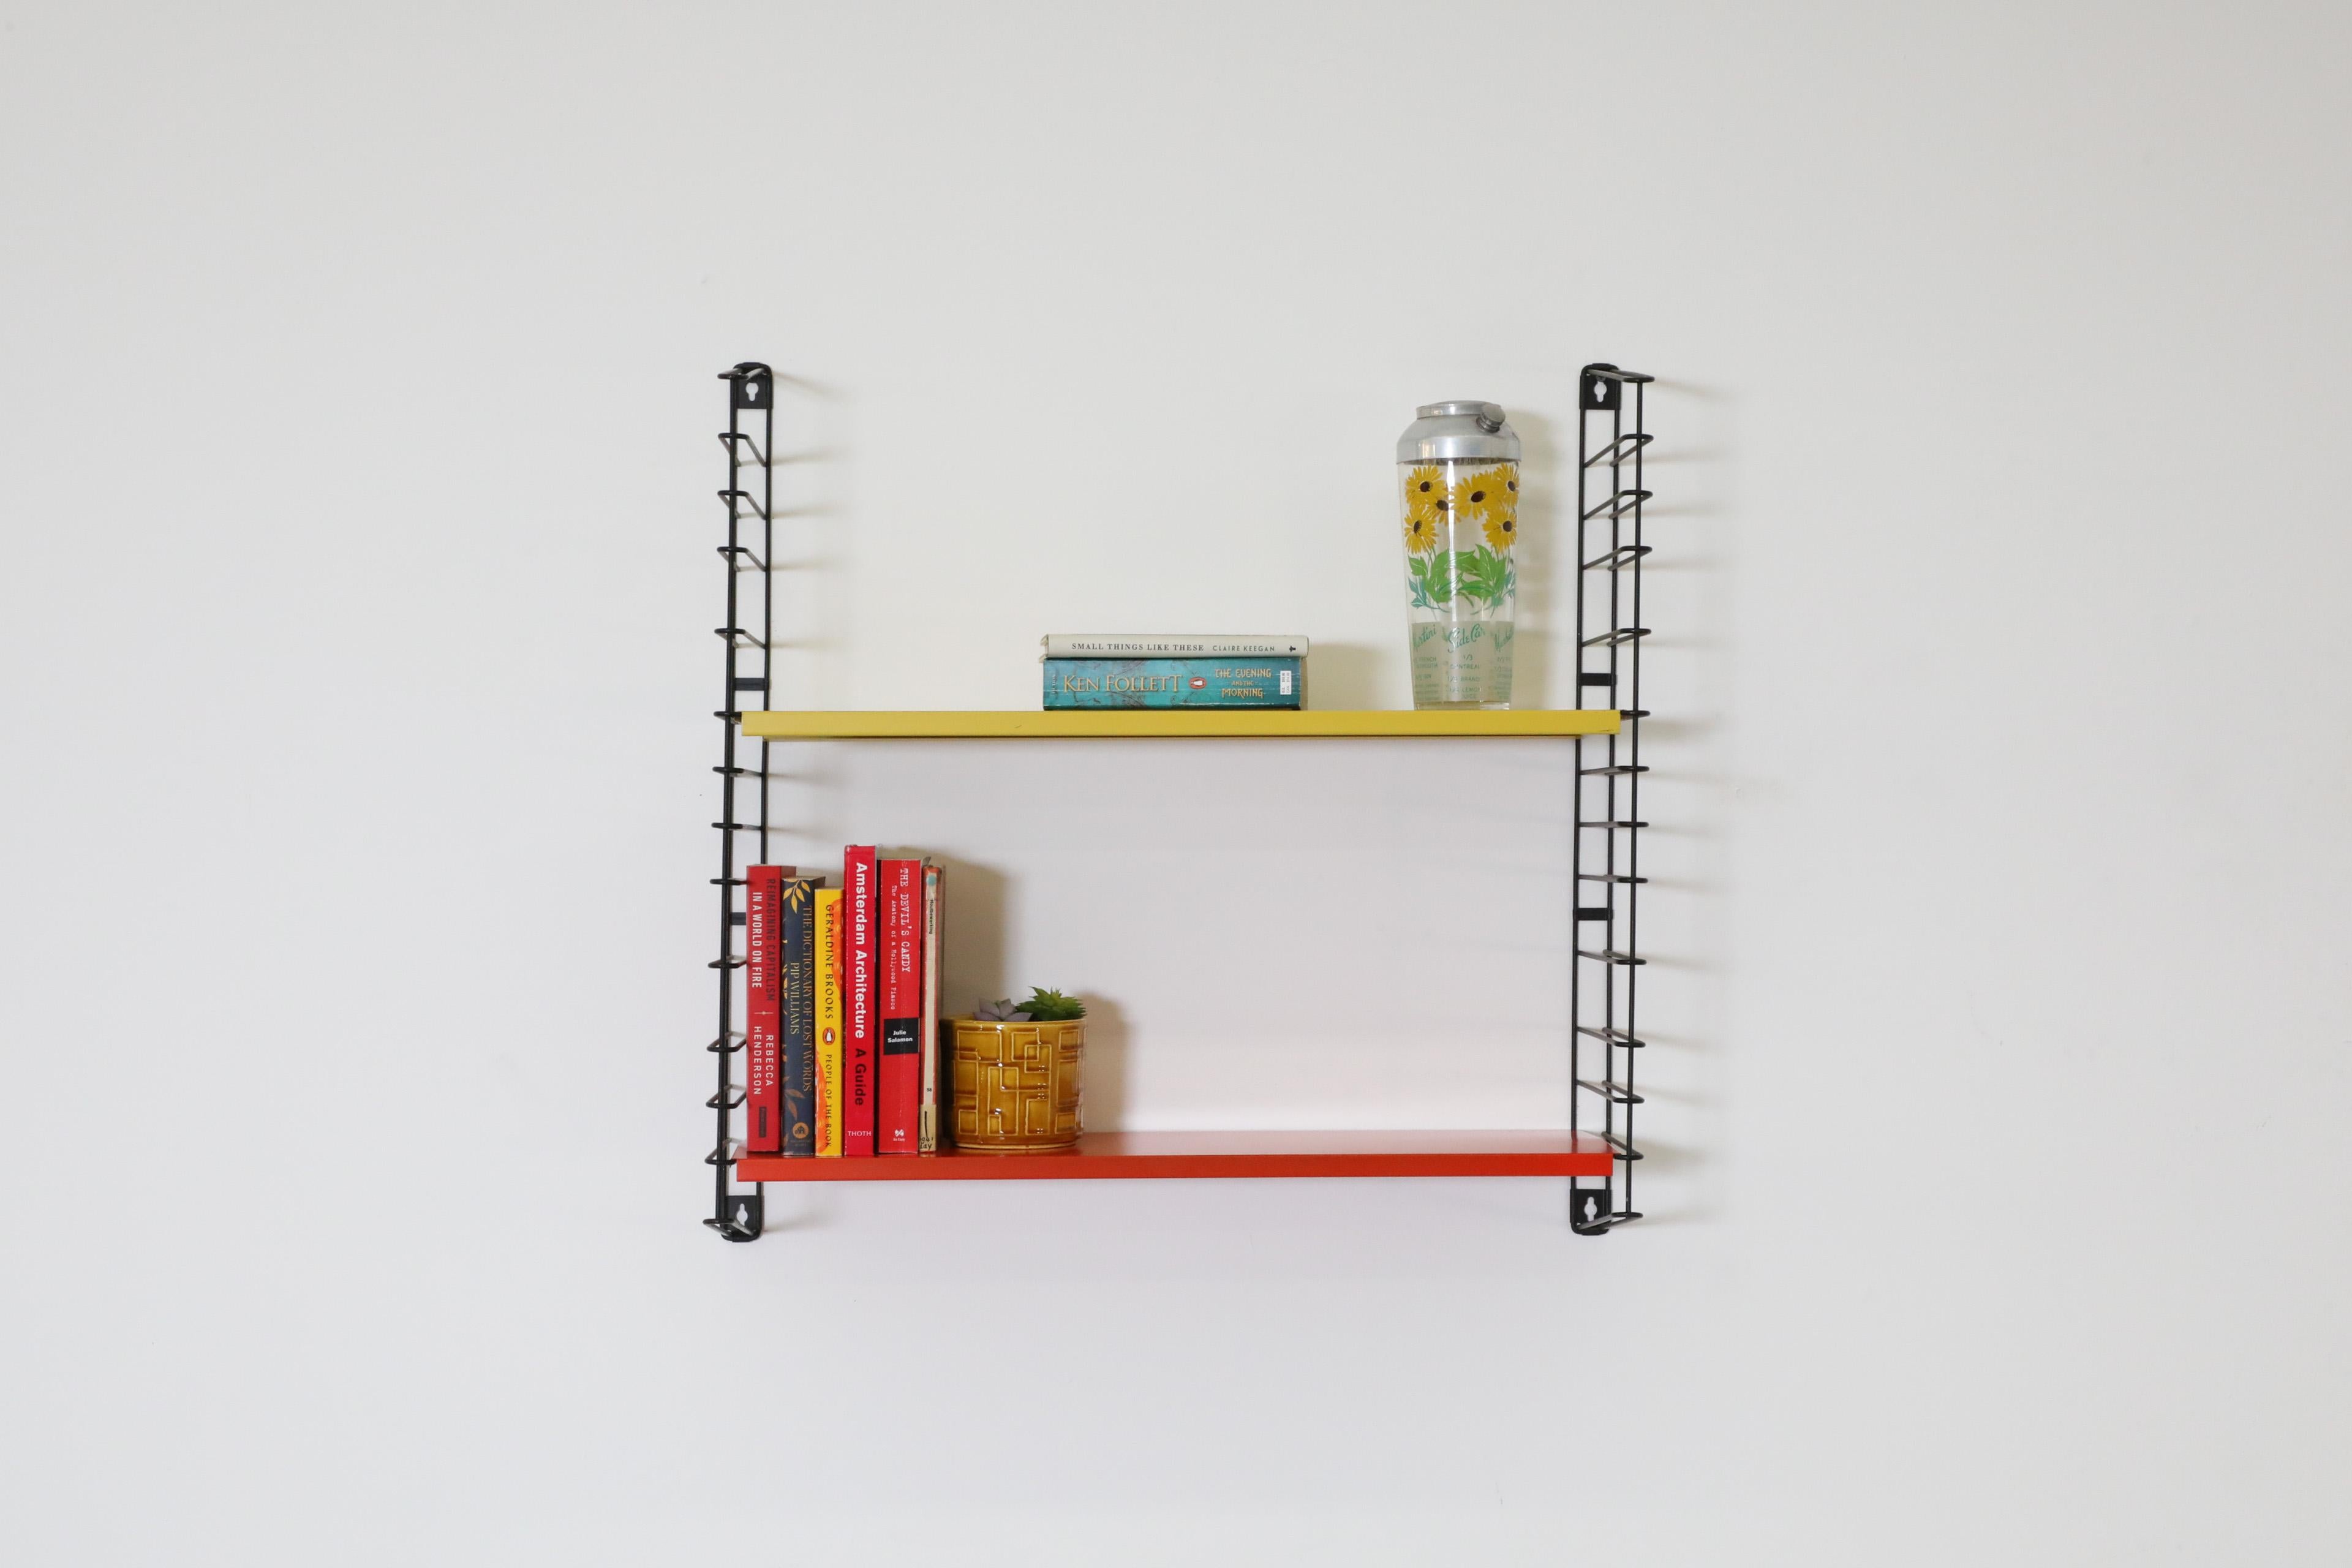 Single section of original Tomado wall mounted shelving unit with yellow and orange metal shelves on black wire risers. Attractive industrial style book or display shelf. In original condition with visible wear consistent with its age and use. Ships